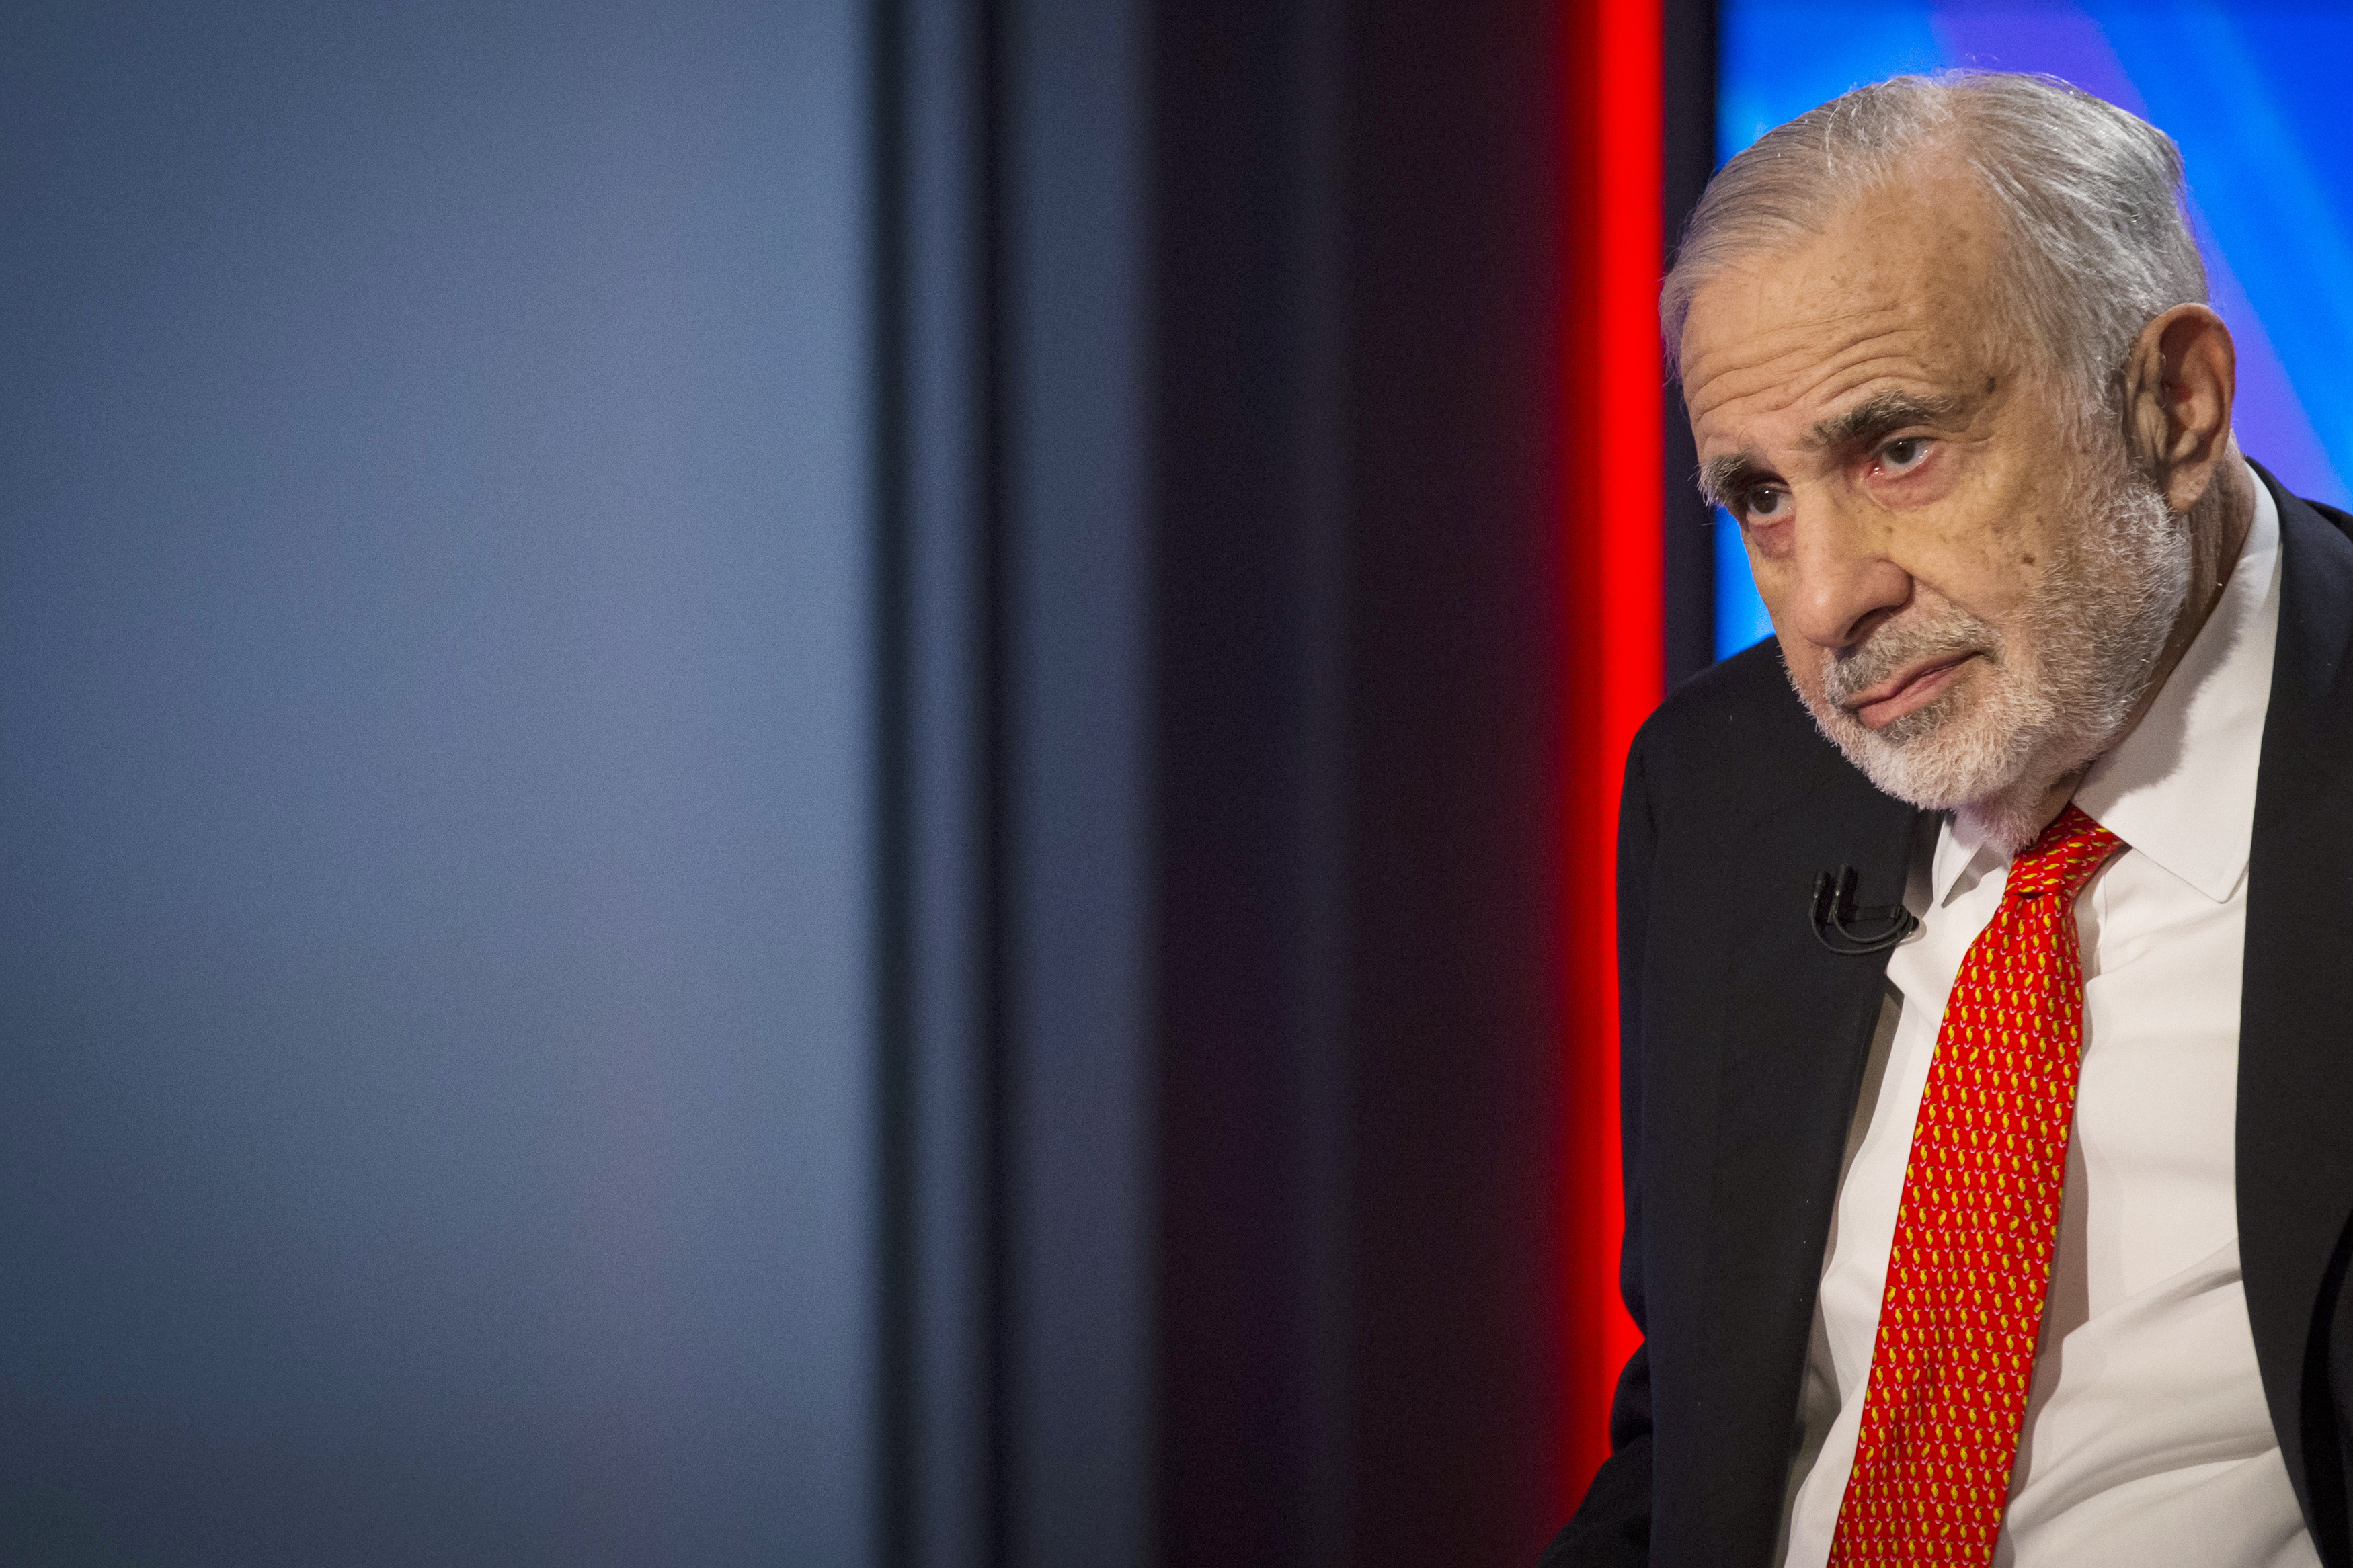 Carl Icahn gives an interview on FOX Business Network's Neil Cavuto show in New York Feb. 11, 2014. (Brendan McDermid—Reuters)